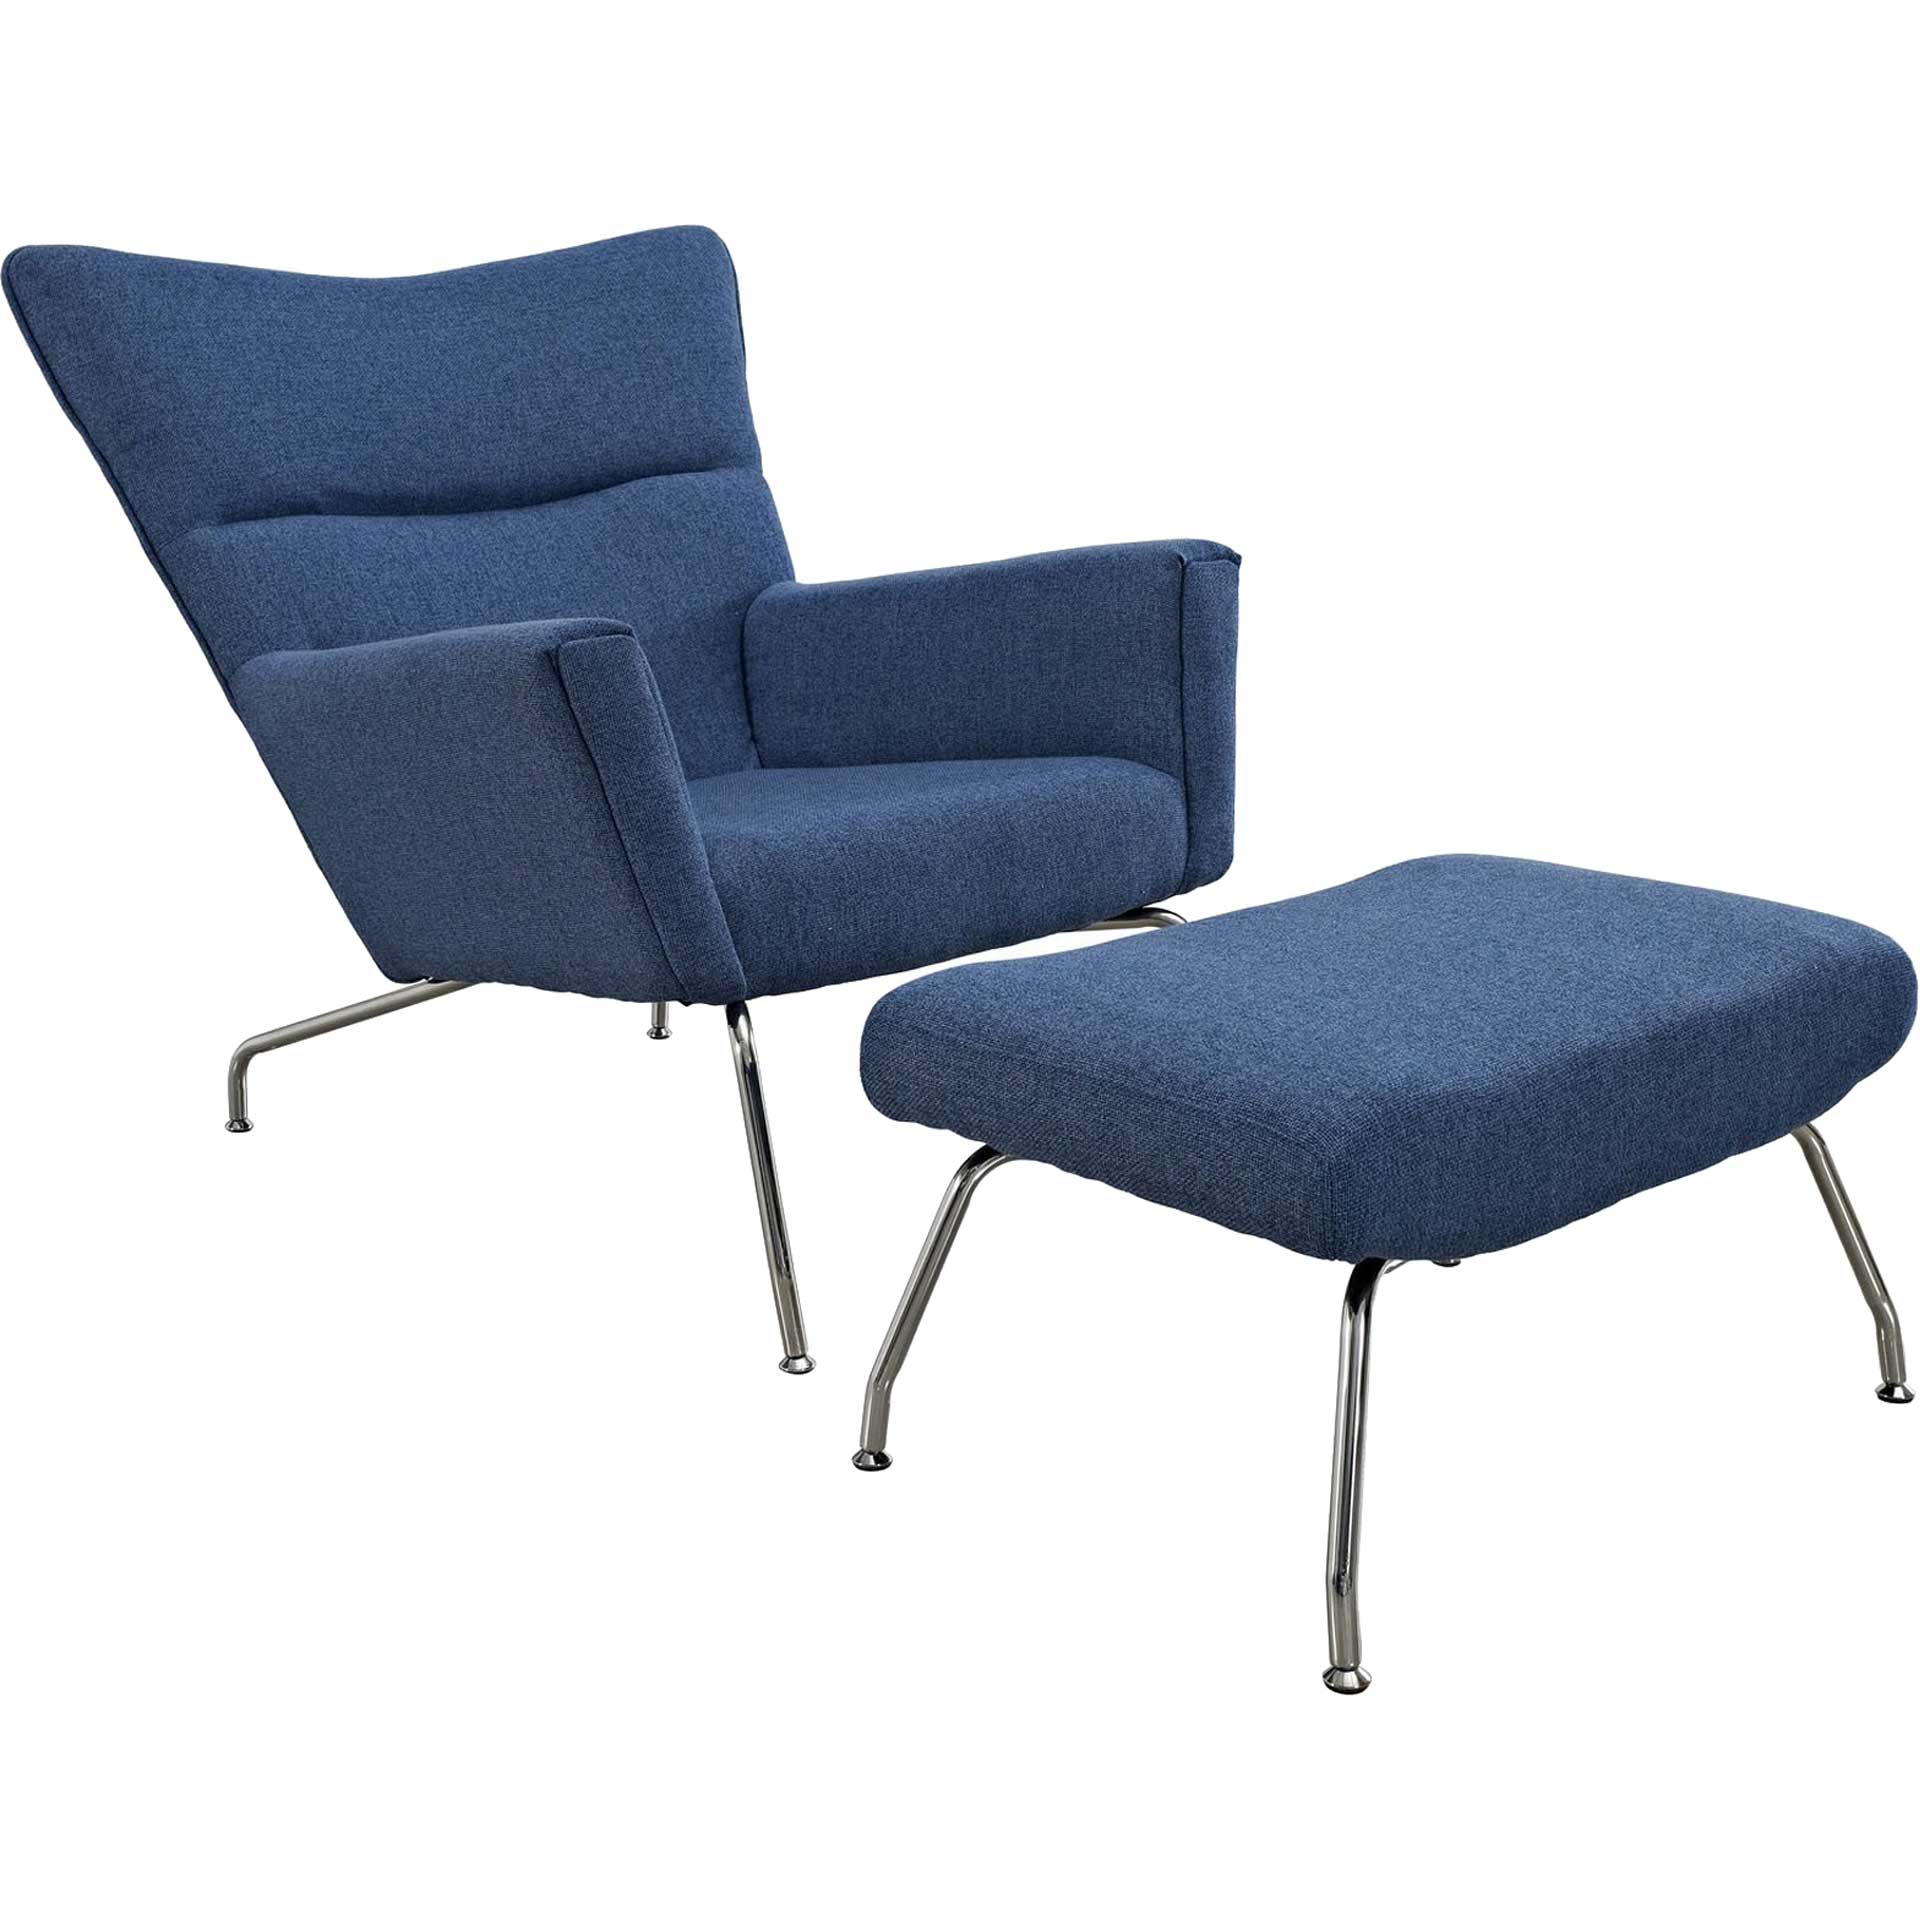 Clarell Lounge Chair Blue Tweed